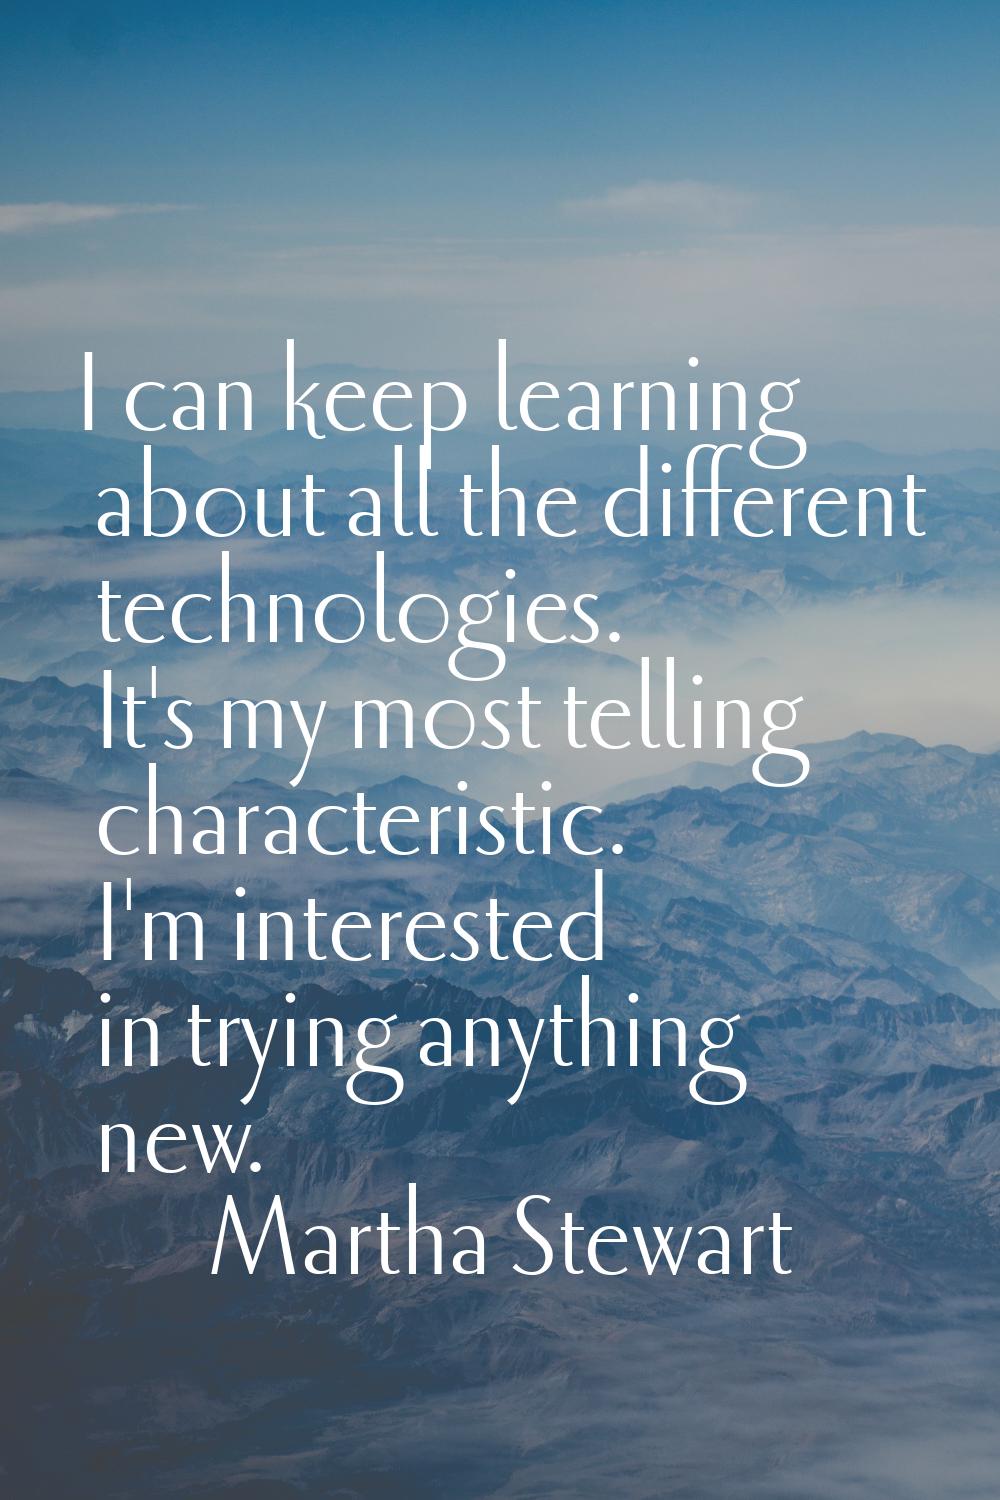 I can keep learning about all the different technologies. It's my most telling characteristic. I'm 